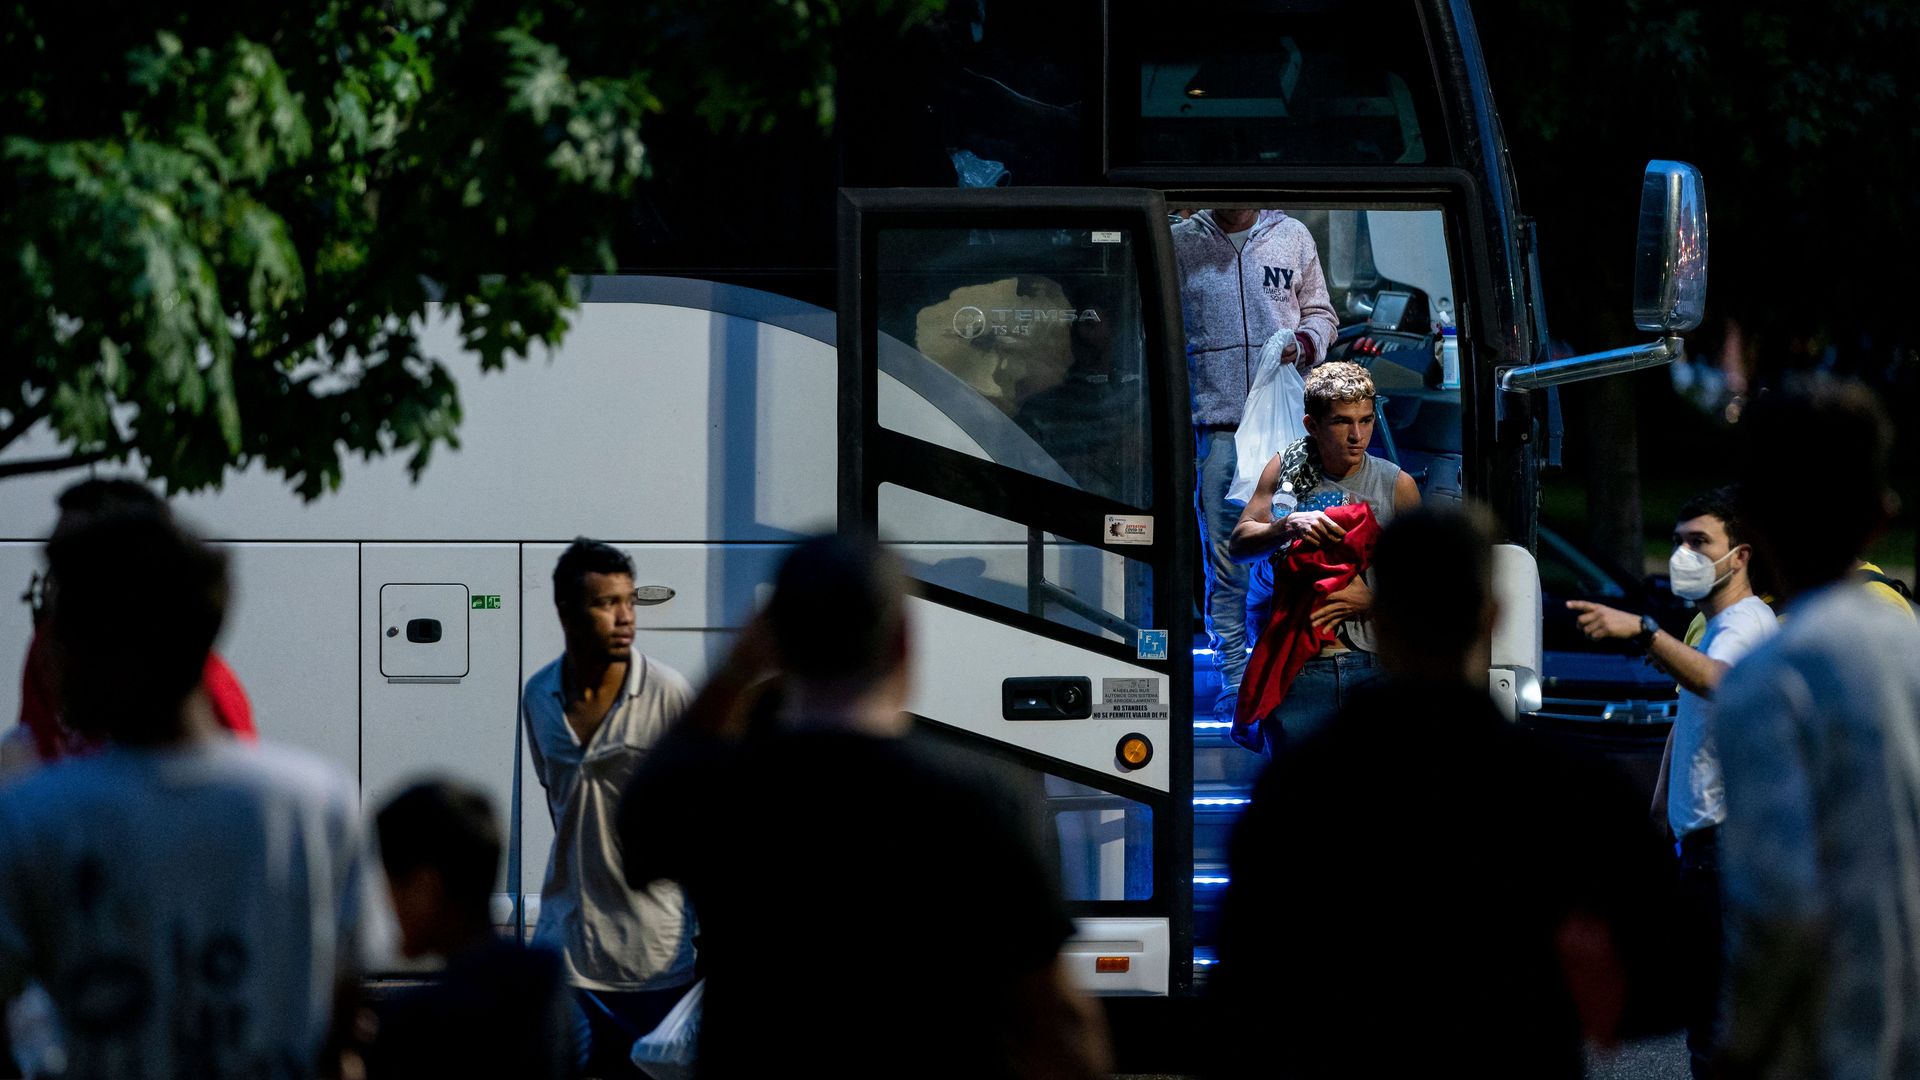 Migrants, who boarded a bus in Texas, are dropped off within view of the US Capitol building in Washington, DC.